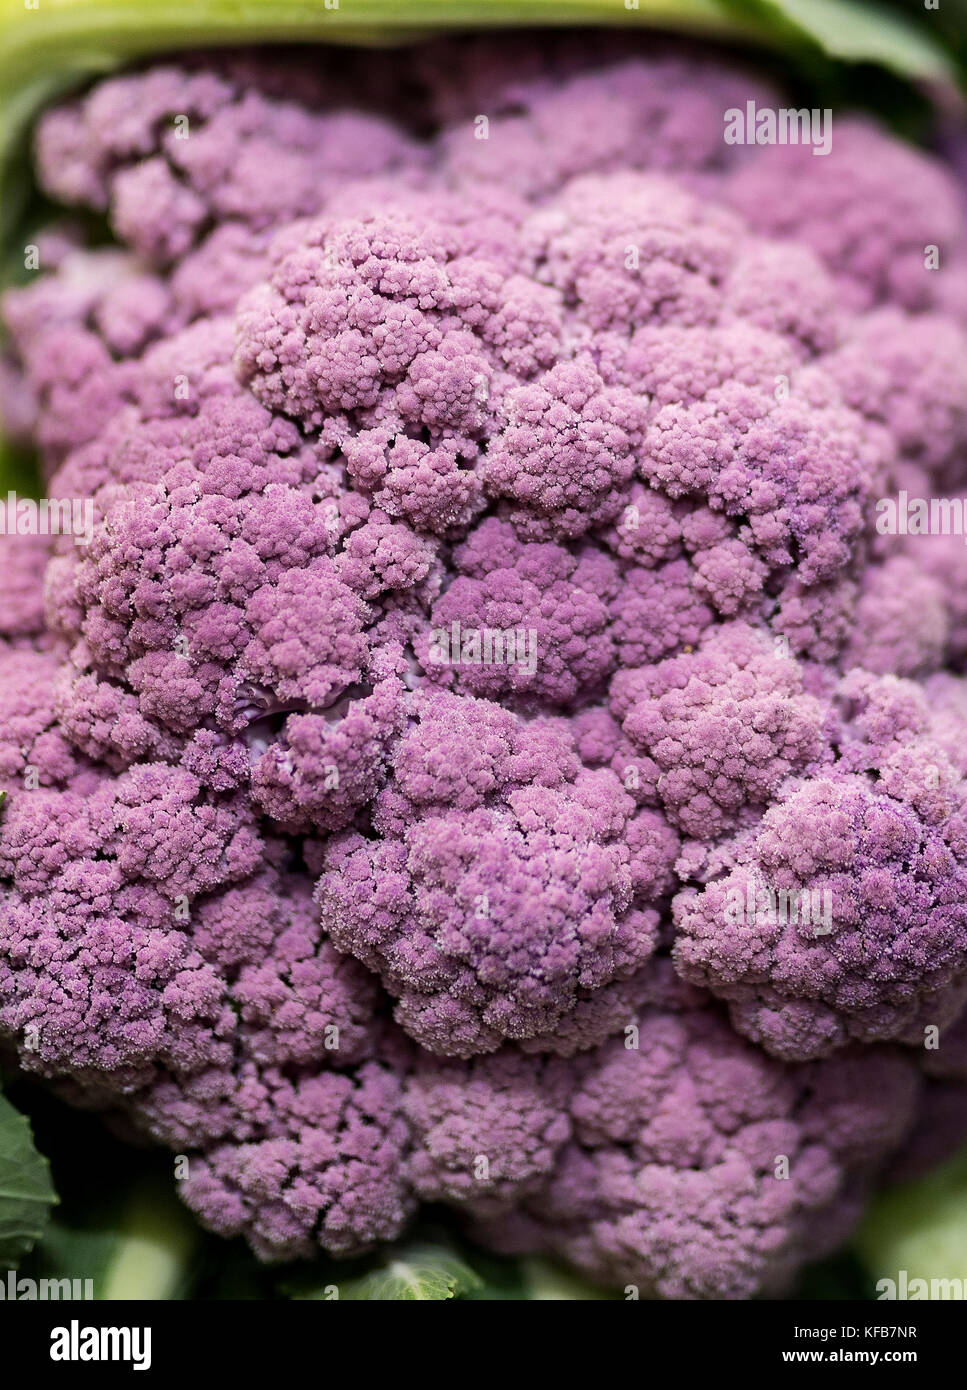 Close up of delicious and colourful, ripe and vibrant purple cauliflower texture vegetable on a market stall in Yorkshire, UK Stock Photo